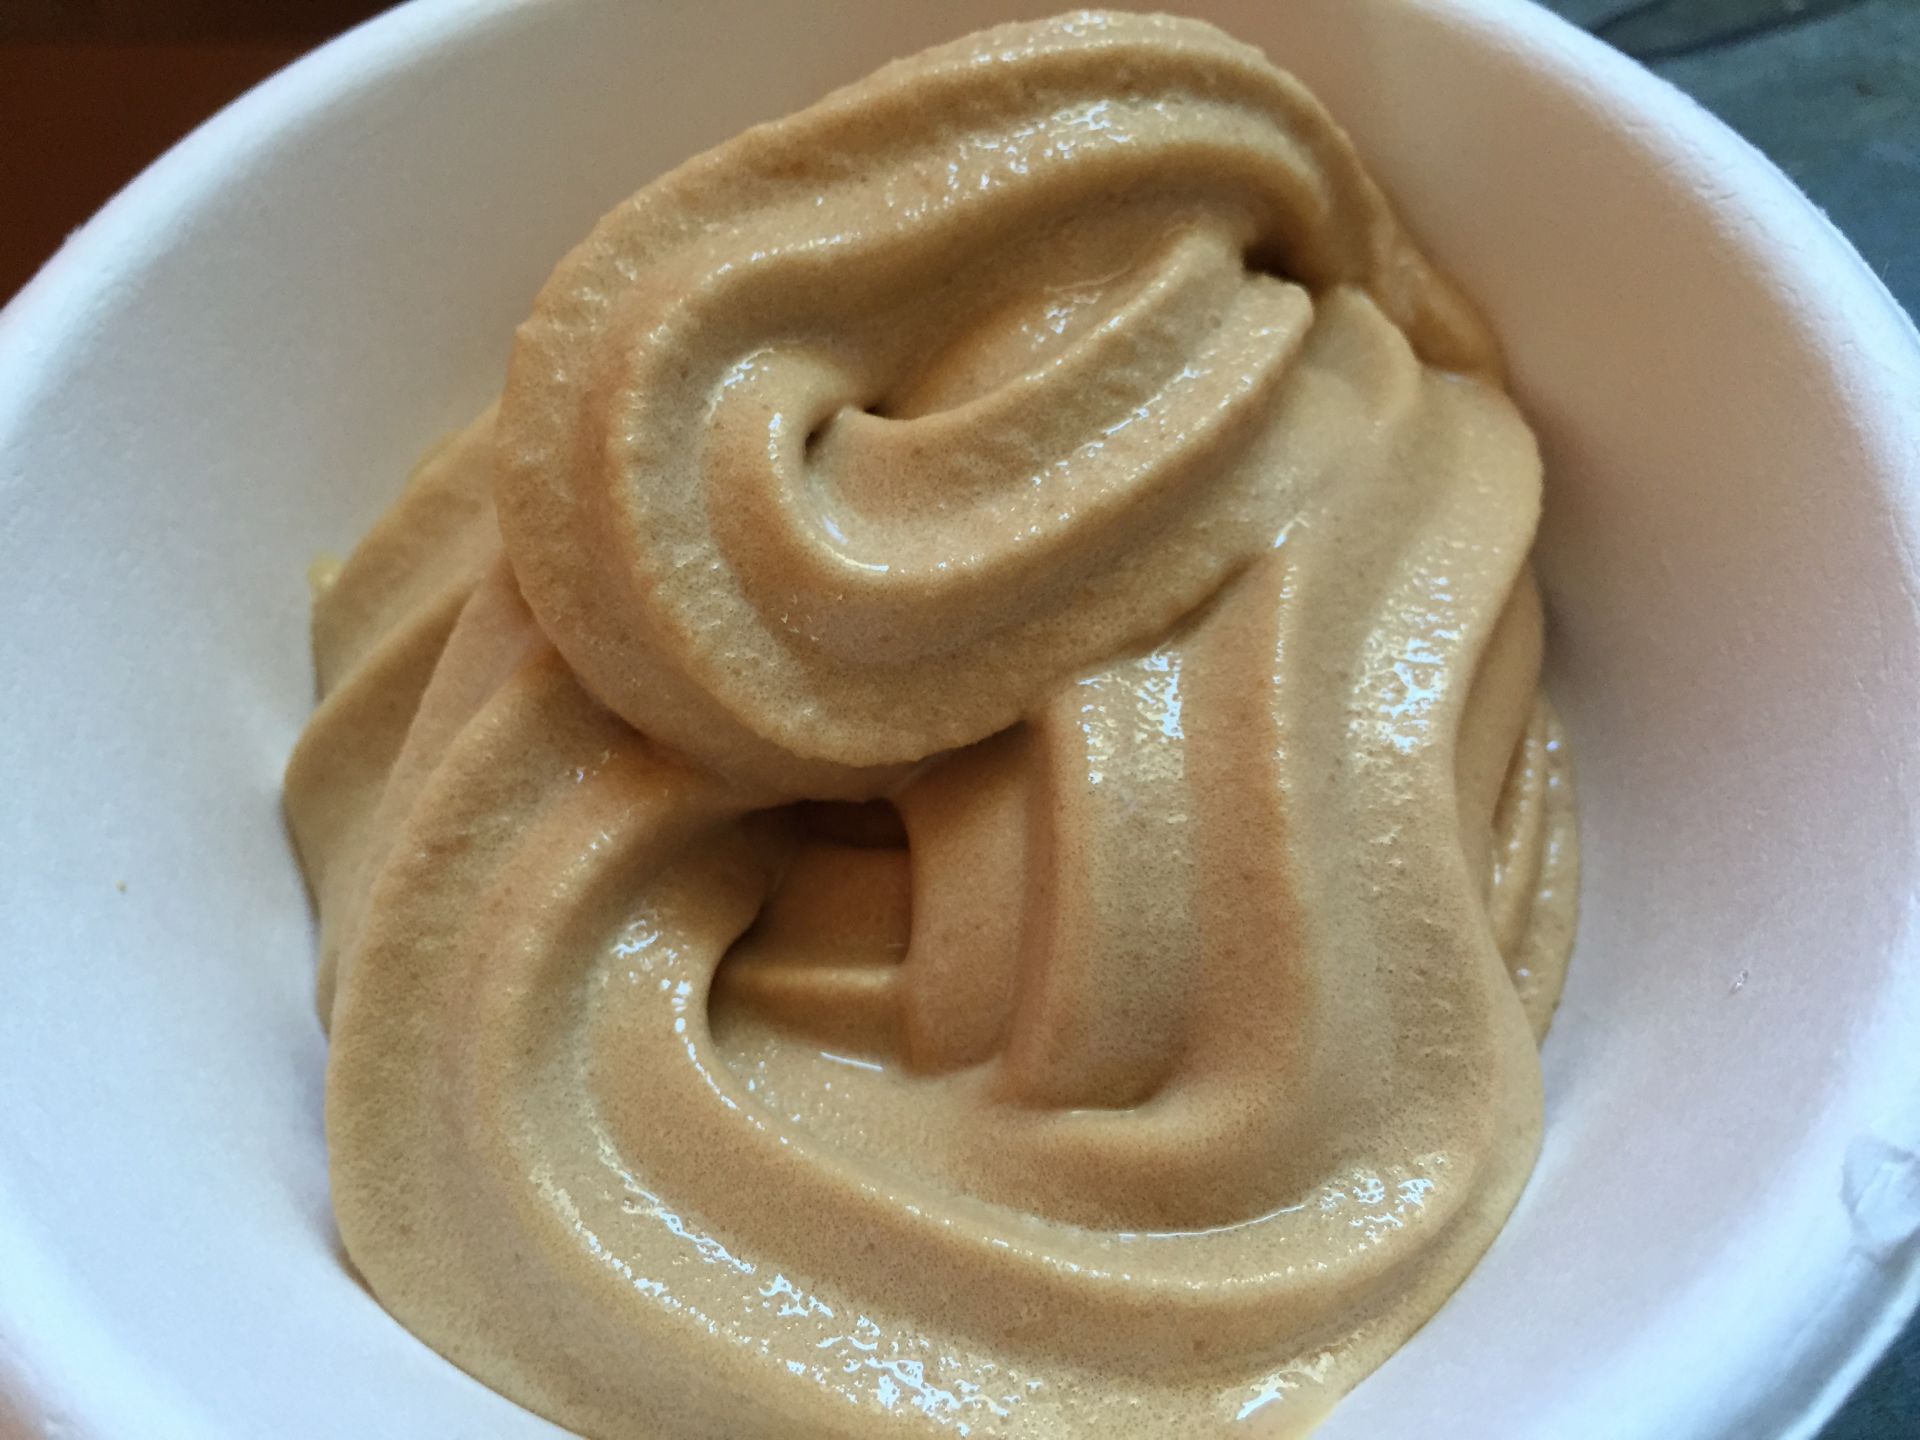 Goats' milk fro-yo doesn't taste as goat-y as one might expect.